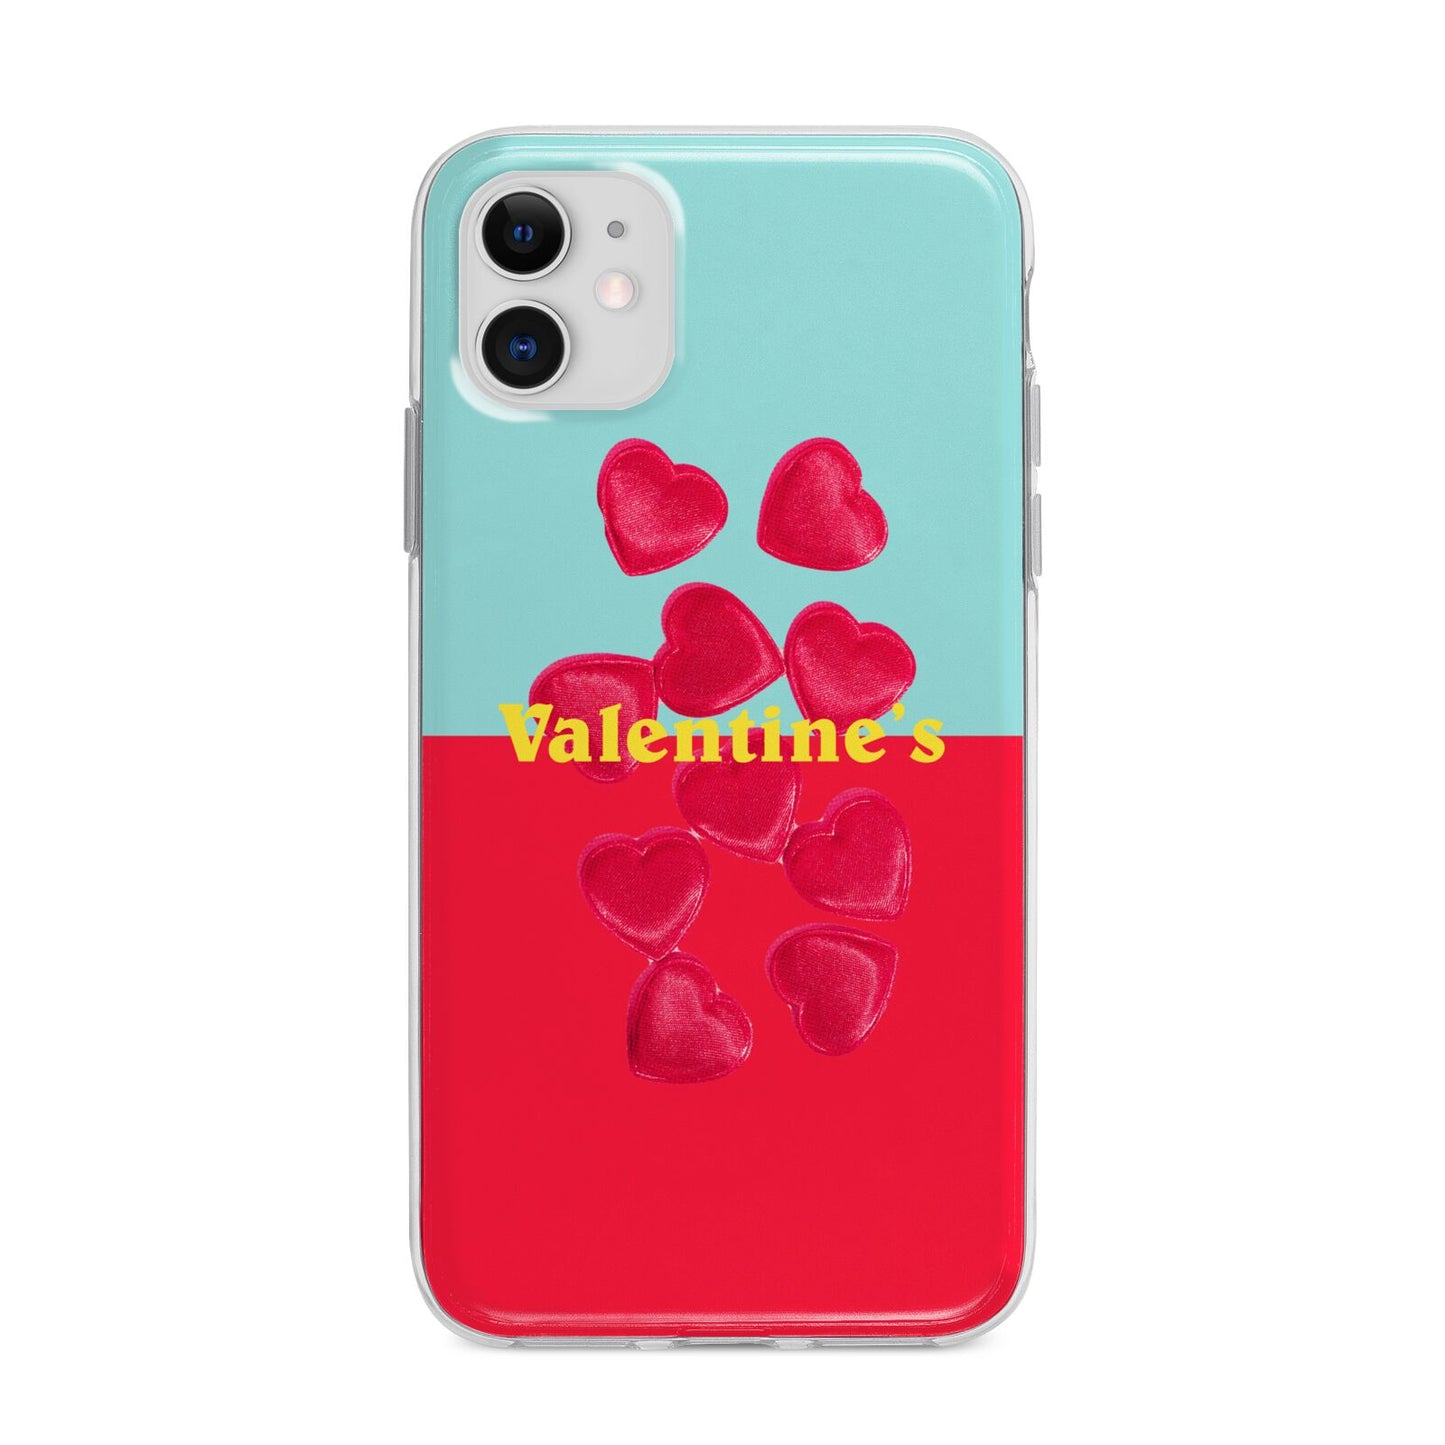 Valentines Sweets Apple iPhone 11 in White with Bumper Case